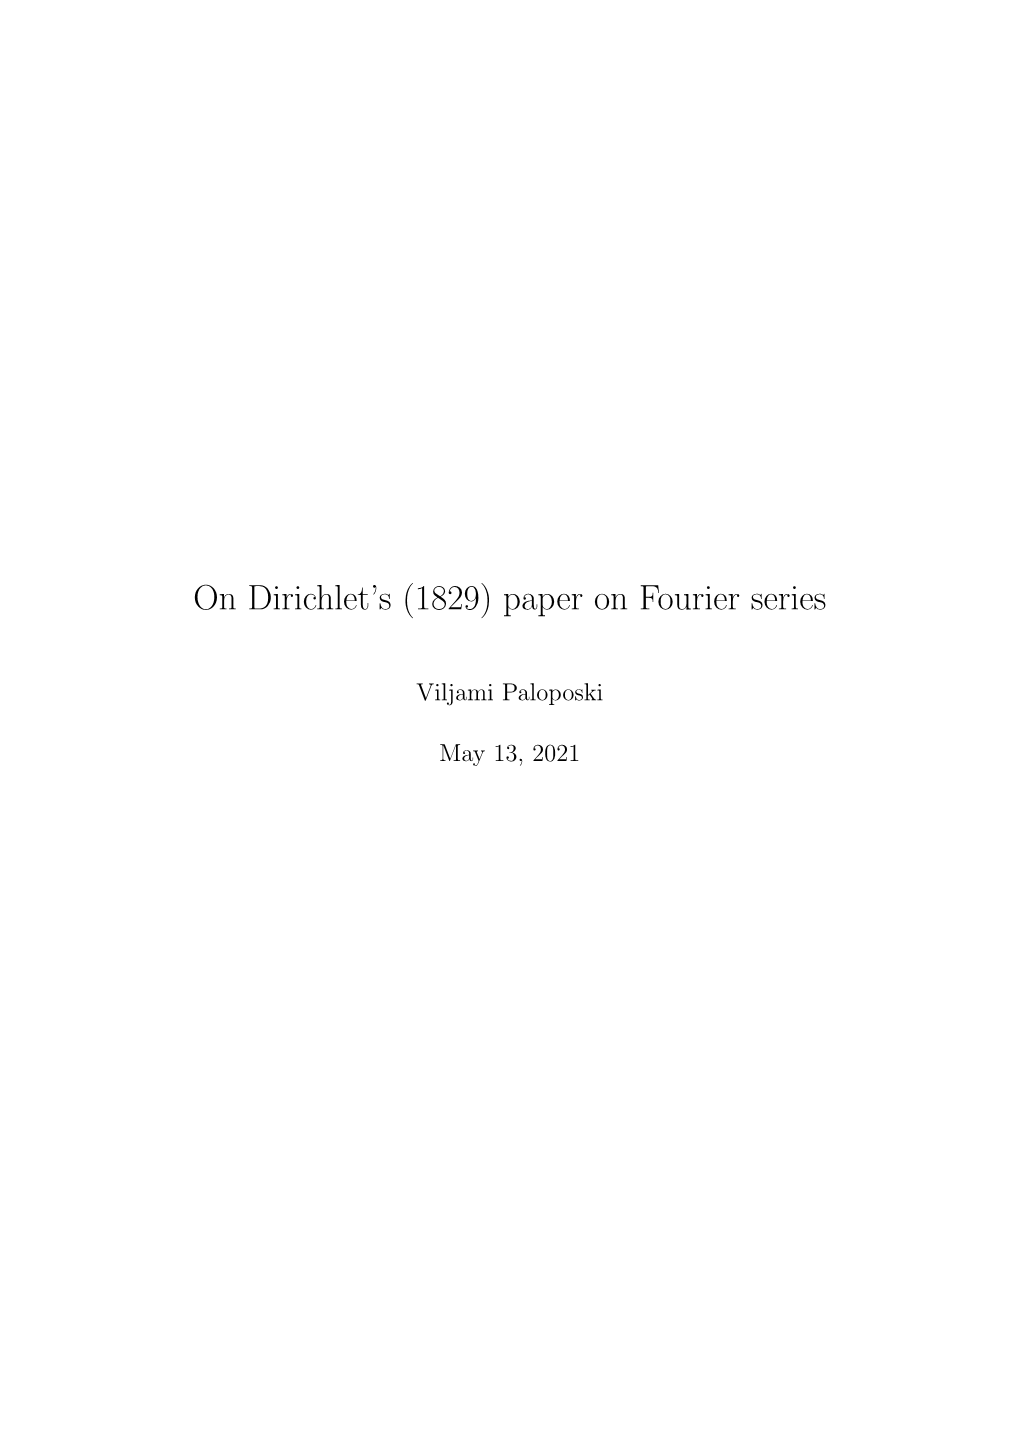 Paper on Fourier Series